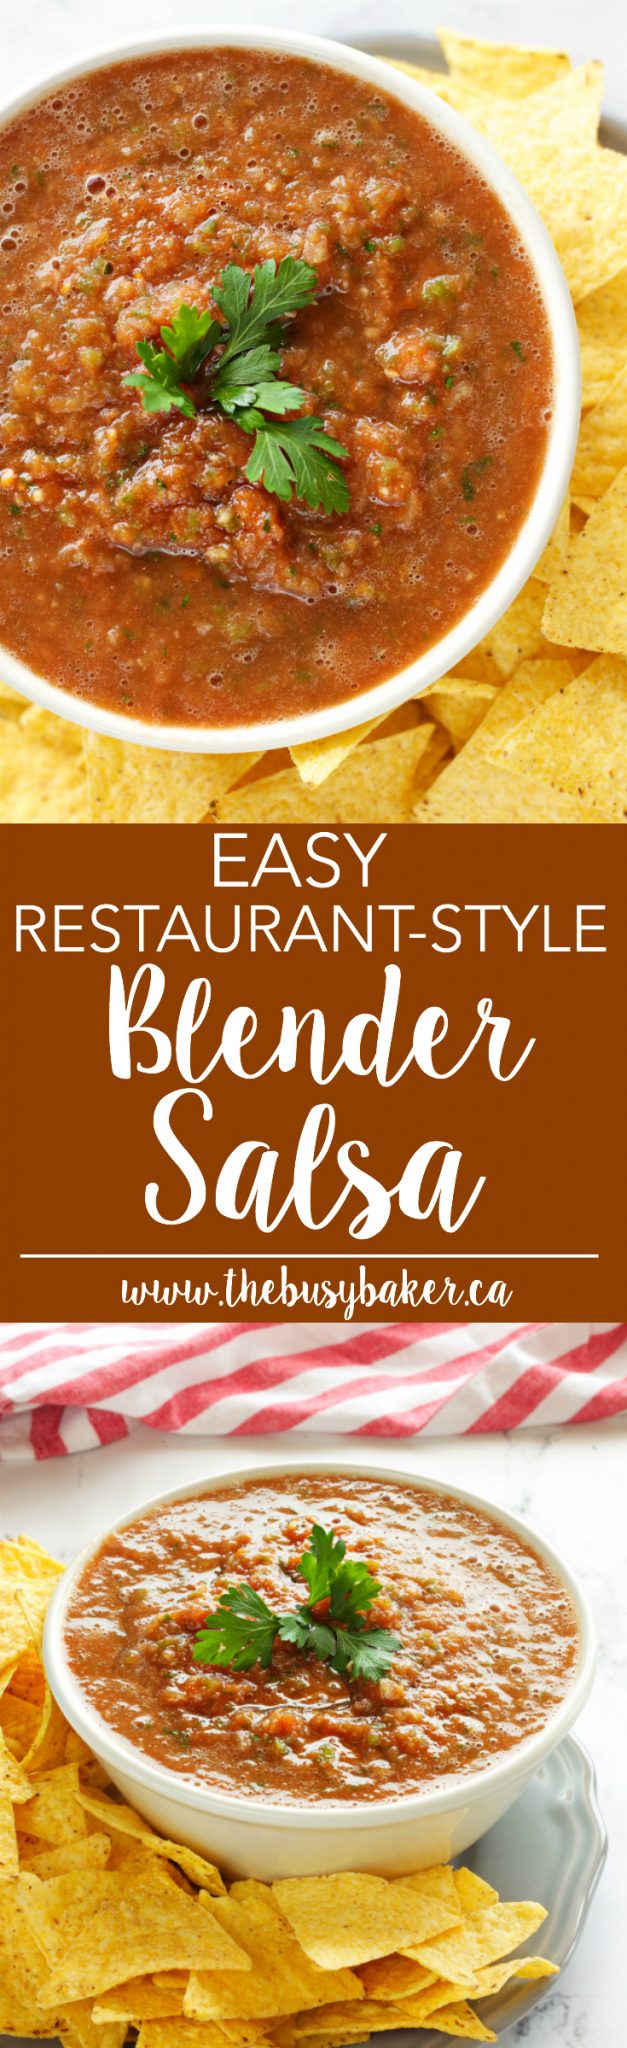 This Easy Mexican Restaurant Style Blender Salsa tastes so fresh and it's perfect for dipping with tortilla chips! via @busybakerblog